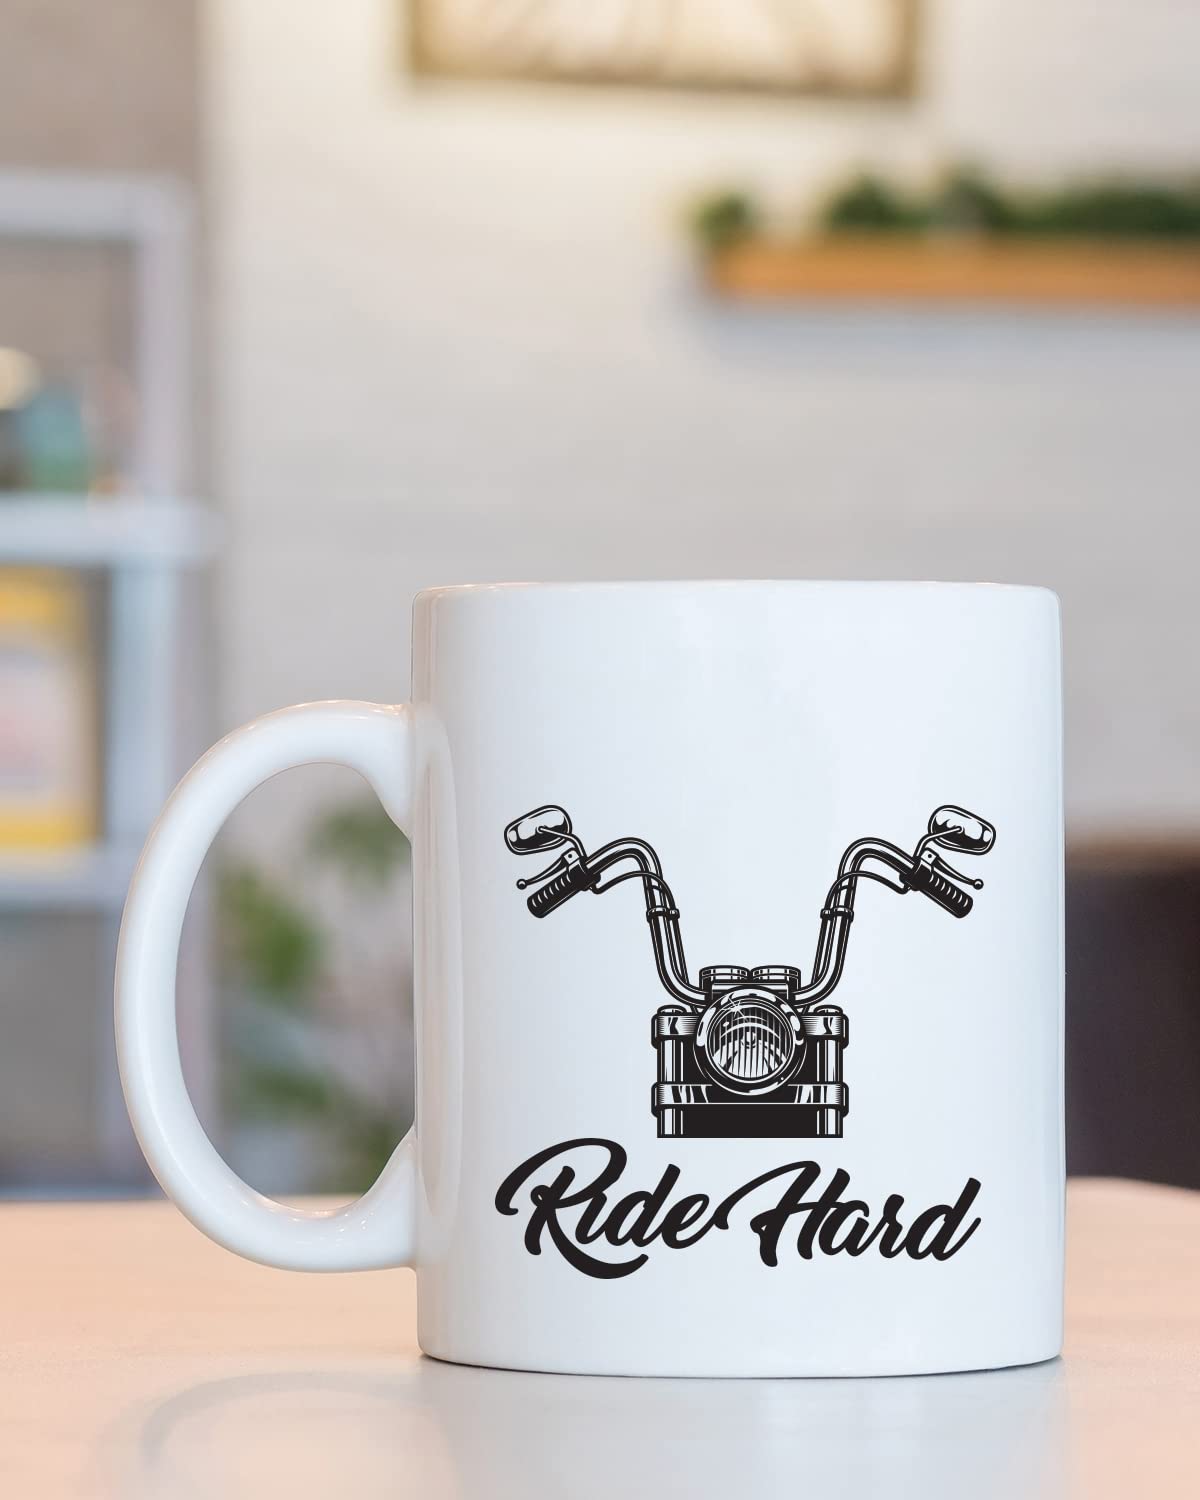 Ride Hard Coffee Mug - Unique Gifts for Bikers, Motorcycle Personalized Mugs, Gifts for Motorcycle Lovers, Bike Quotes Mug for Husband Boyfriend Birthday, Valentine Mugs for Him